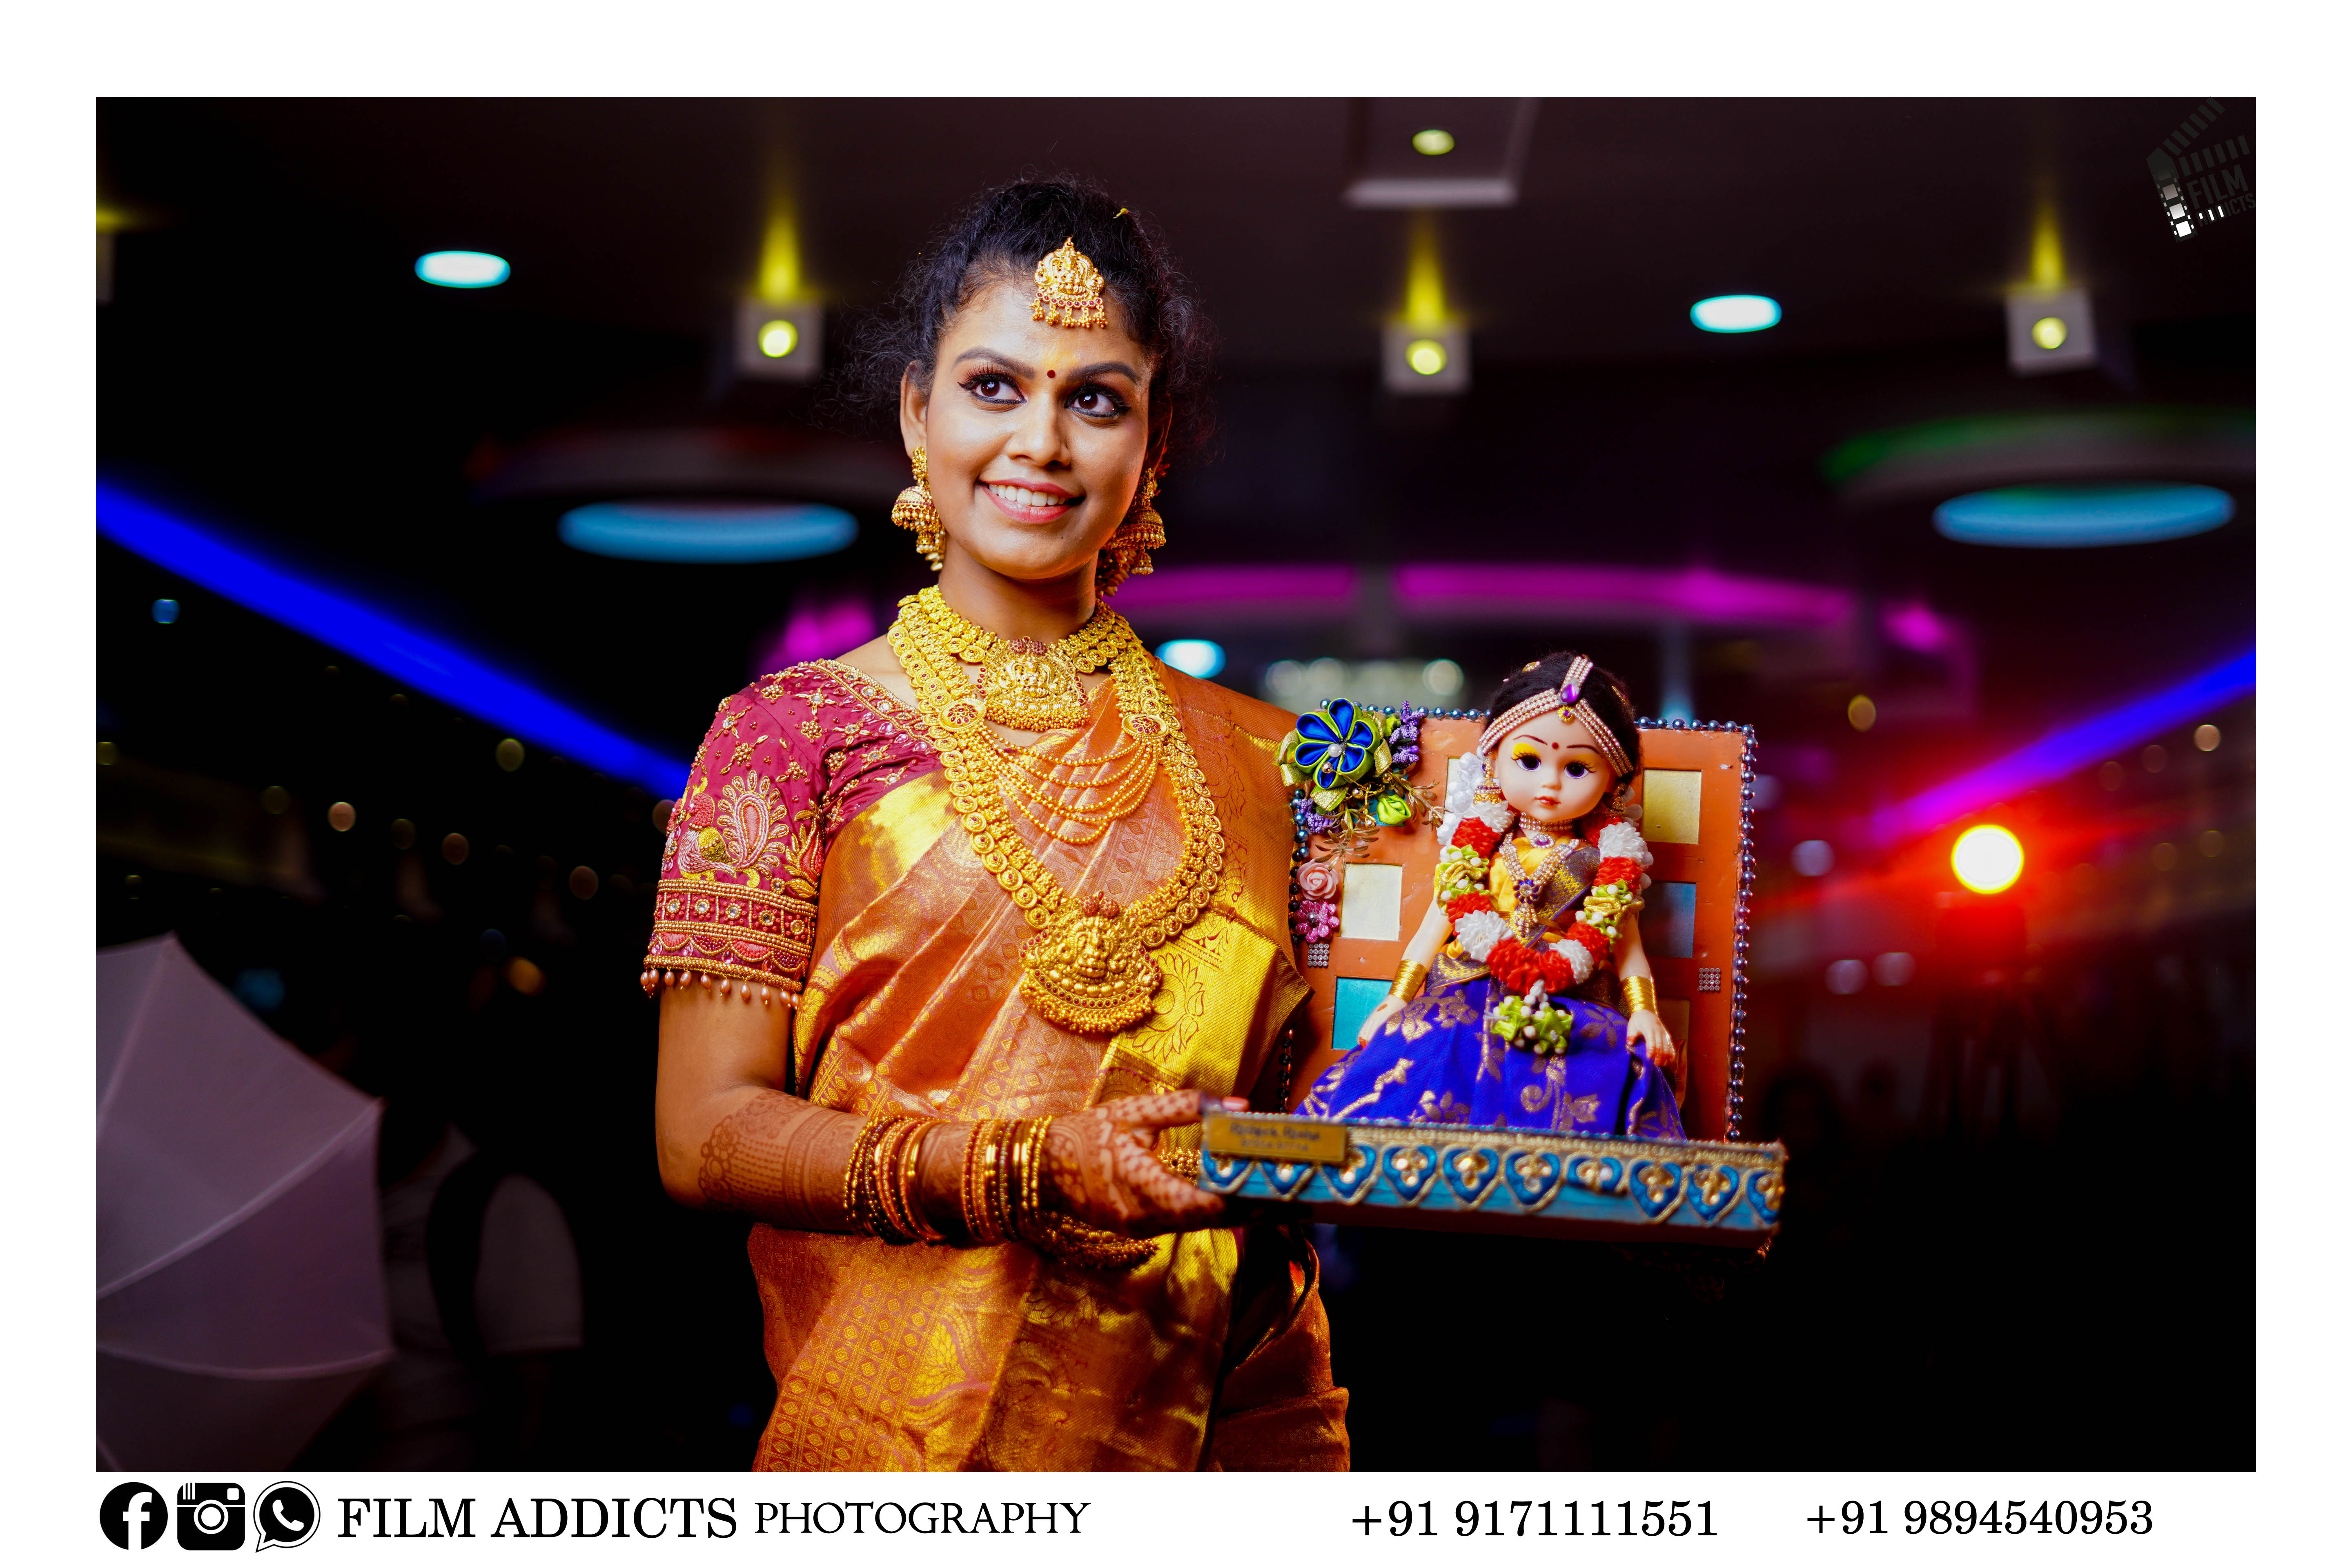 Best Puberty Photography in Thanjavur-FilmAddicts Photography,best Wedding photographers in Thanjavur,best candid photographers in Thanjavur,best Wedding photography in Thanjavur,best candid photography in Thanjavur, Best Wedding candid Photographers in Thanjavur, best marriage photographers in Thanjavur,best marriage photography in Thanjavur,best photographers in Thanjavur,best photography in Thanjavur,best Wedding candid photography in Thanjavur,best Wedding video in Thanjavur,best Wedding videographers in Thanjavur,best Wedding videography in Thanjavur,best candid videographers in Thanjavur,best candid videography in Thanjavur,best marriage videographers in Thanjavur,best marriage videography in Thanjavur,best videographers in Thanjavur,best videography in Thanjavur,best Wedding candid videography in Thanjavur,best Wedding candid videographers in Thanjavur,best helicam operators in Thanjavur,best drone operators in Thanjavur,best Wedding studio in Thanjavur,best professional photographers in Thanjavur,best professional photography in Thanjavur,No.1 Wedding photographers in Thanjavur,No.1 Wedding photography in Thanjavur,Thanjavur Wedding photographers,Thanjavur Wedding photography,Thanjavur Wedding videos,best candid videos in Thanjavur,best candid photos in Thanjavur,best helicam operators photography in Thanjavur,best helicam operator photographers in Thanjavur,best Wedding videography in Thanjavur.